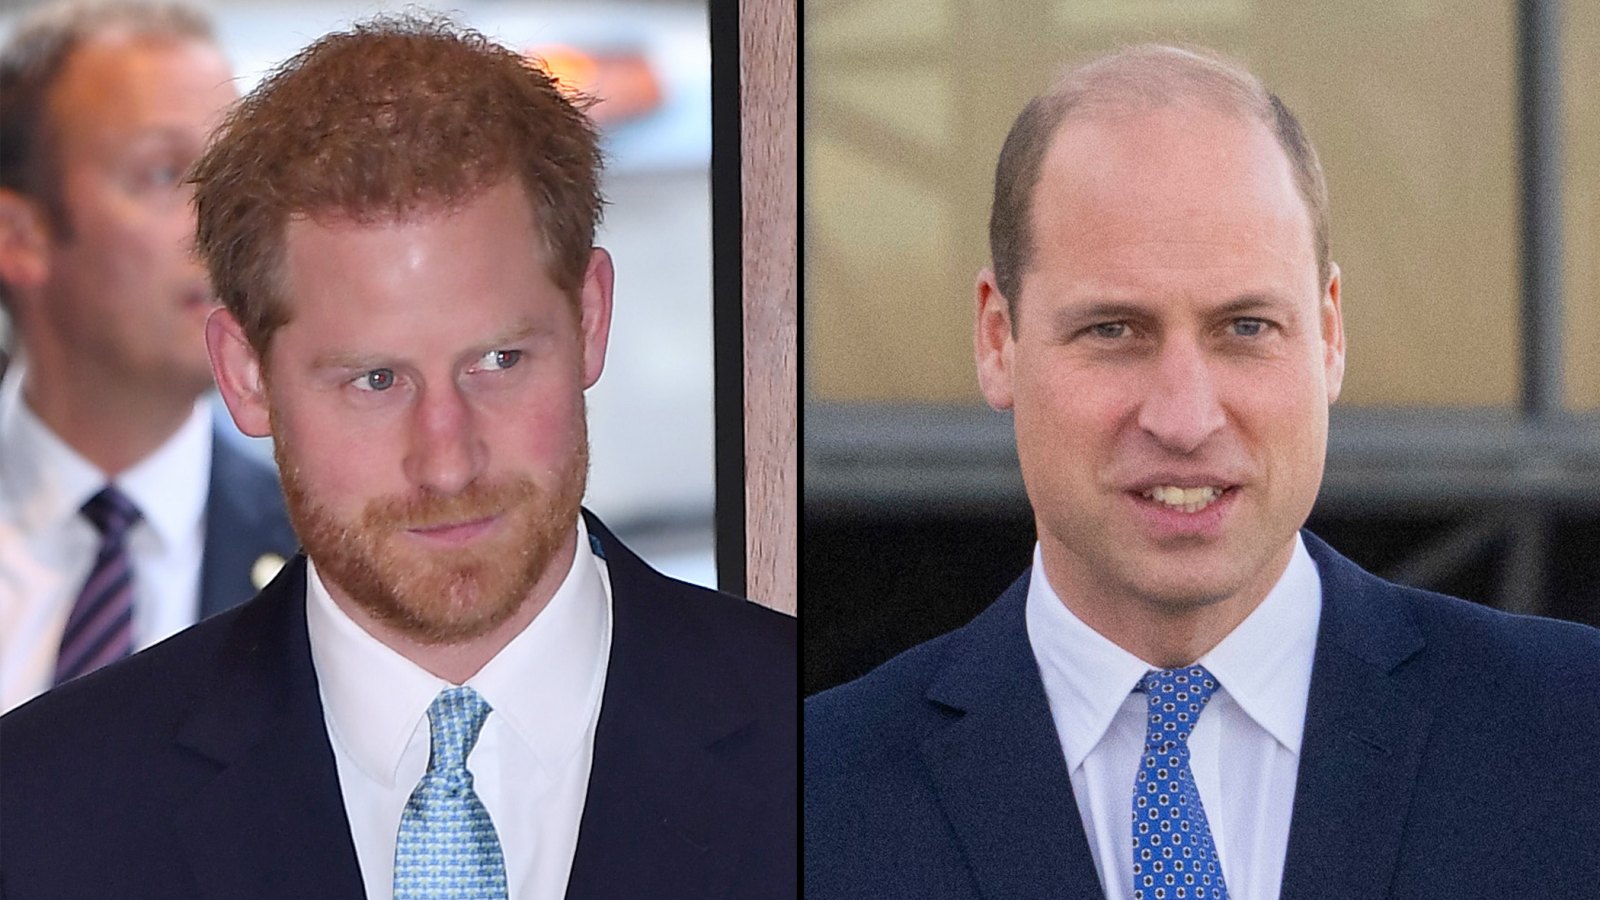 Prince Harry Defends Comment About Prince William's Balding